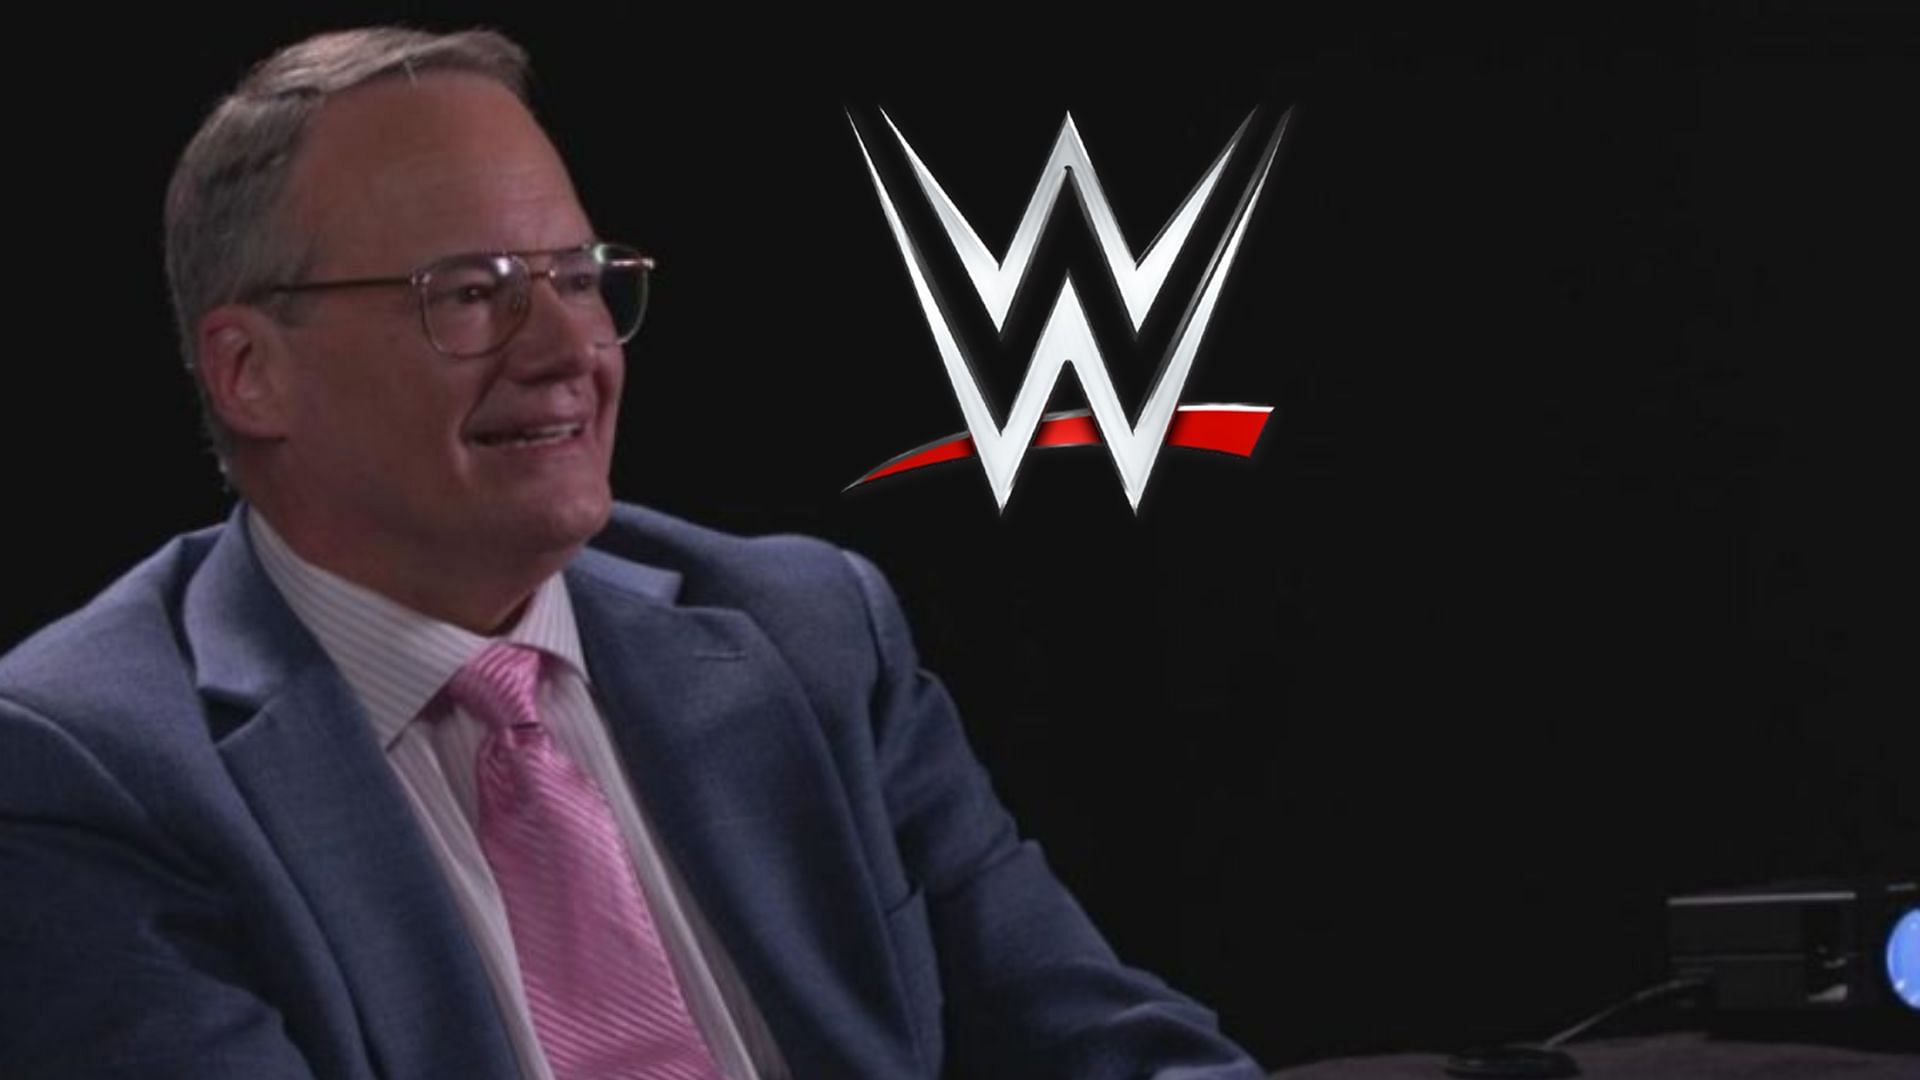 Jim Cornette is a former WWE personality.